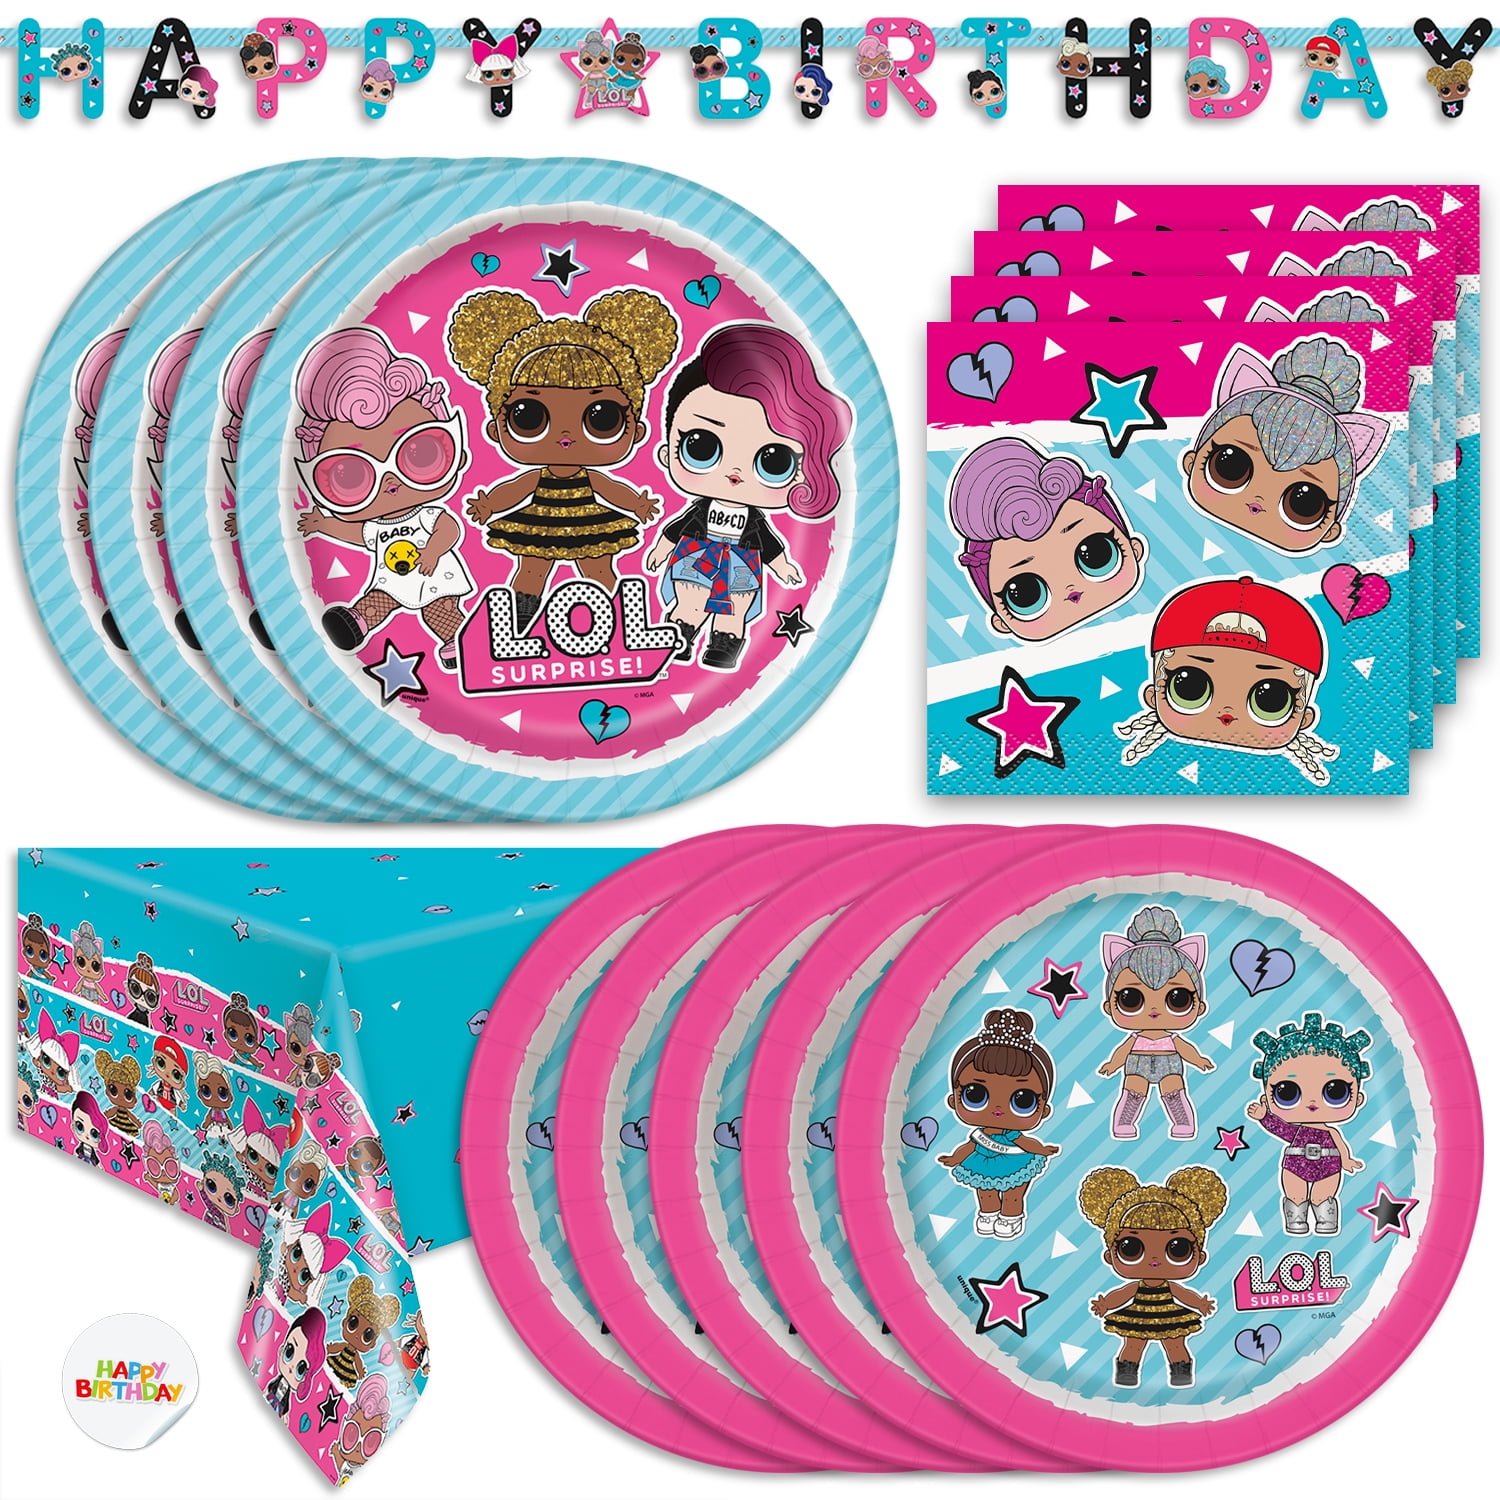 LOL Party Supplies Birthday Decorations | LOL Surprise Supplies | LOL Doll Plates and Napkins, LOL Table Clothes for Party, LOL Birthday Banner | Girl LOL Party | Serves 16 - Walmart.com